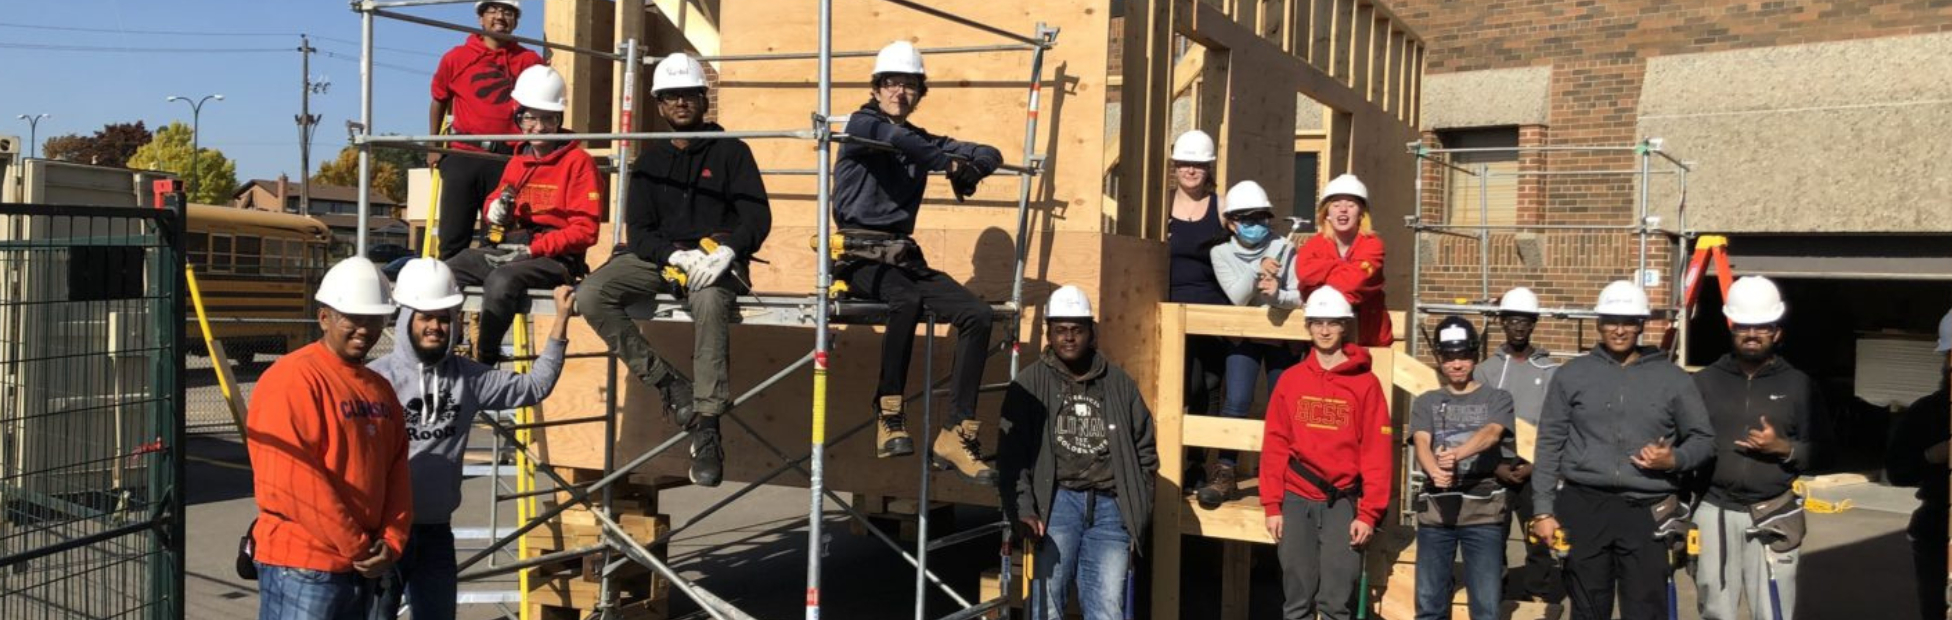 A group of students and teachers around an in-progress home build